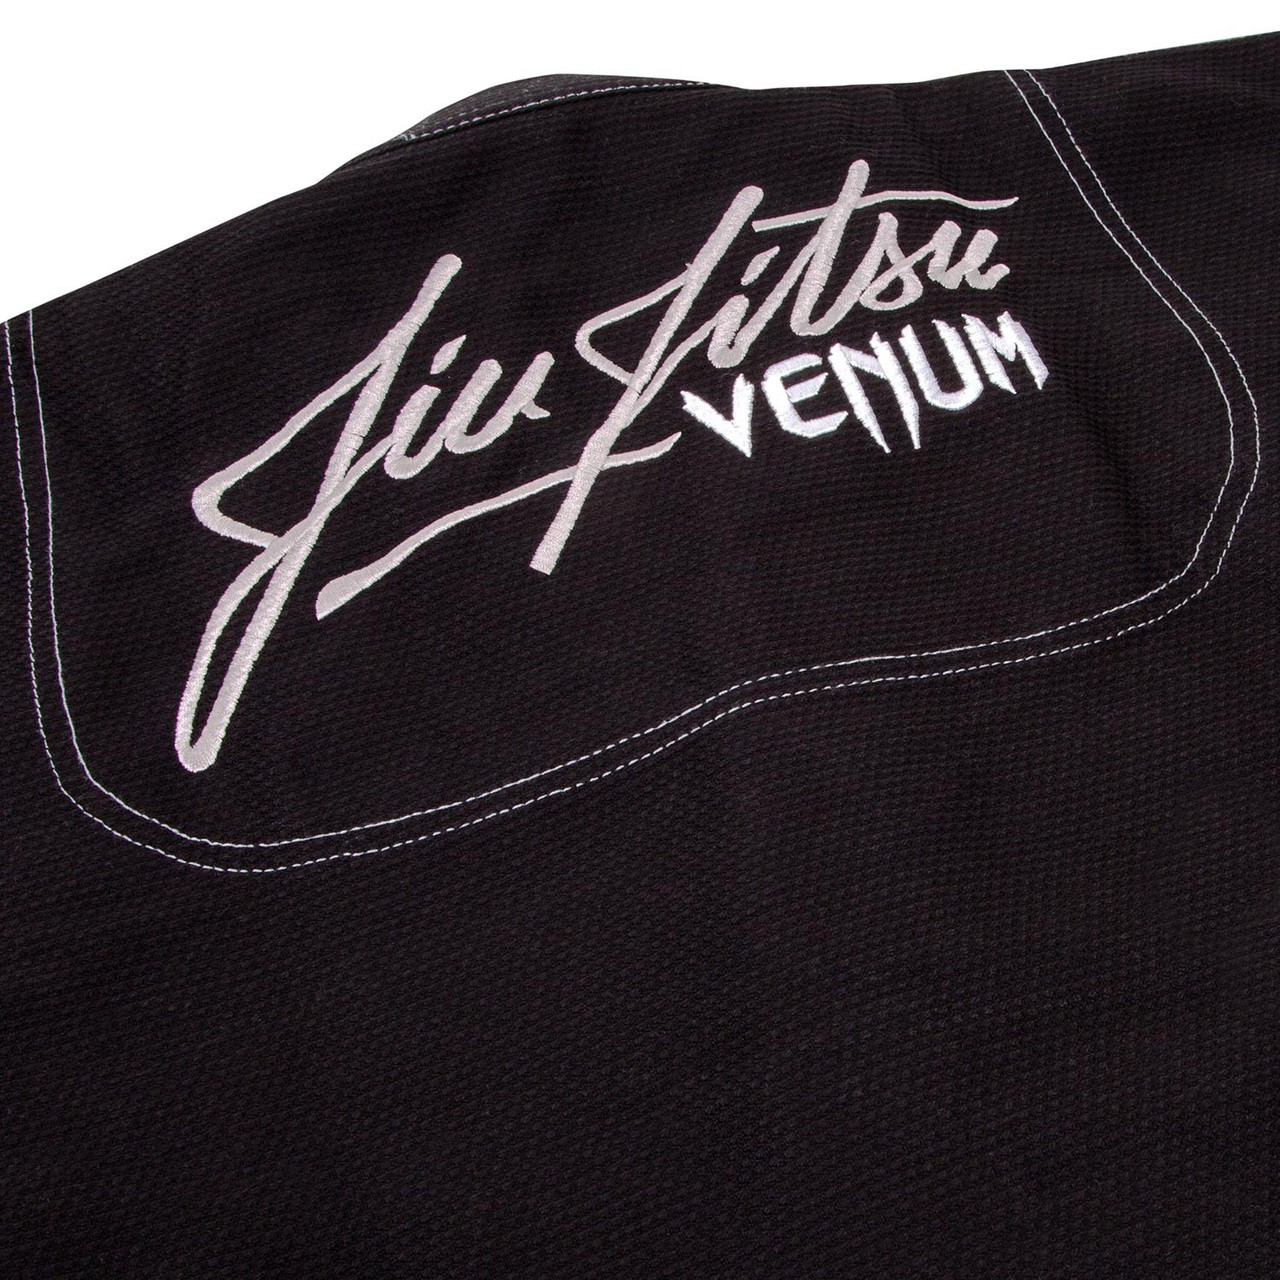 back zoom in view of the Venum challenger 3.0 BJJ Gi Black/Grey Available at www.thejiujitsushop.com

Enjoy Free Shipping from The Jiu Jitsu Shop today! 